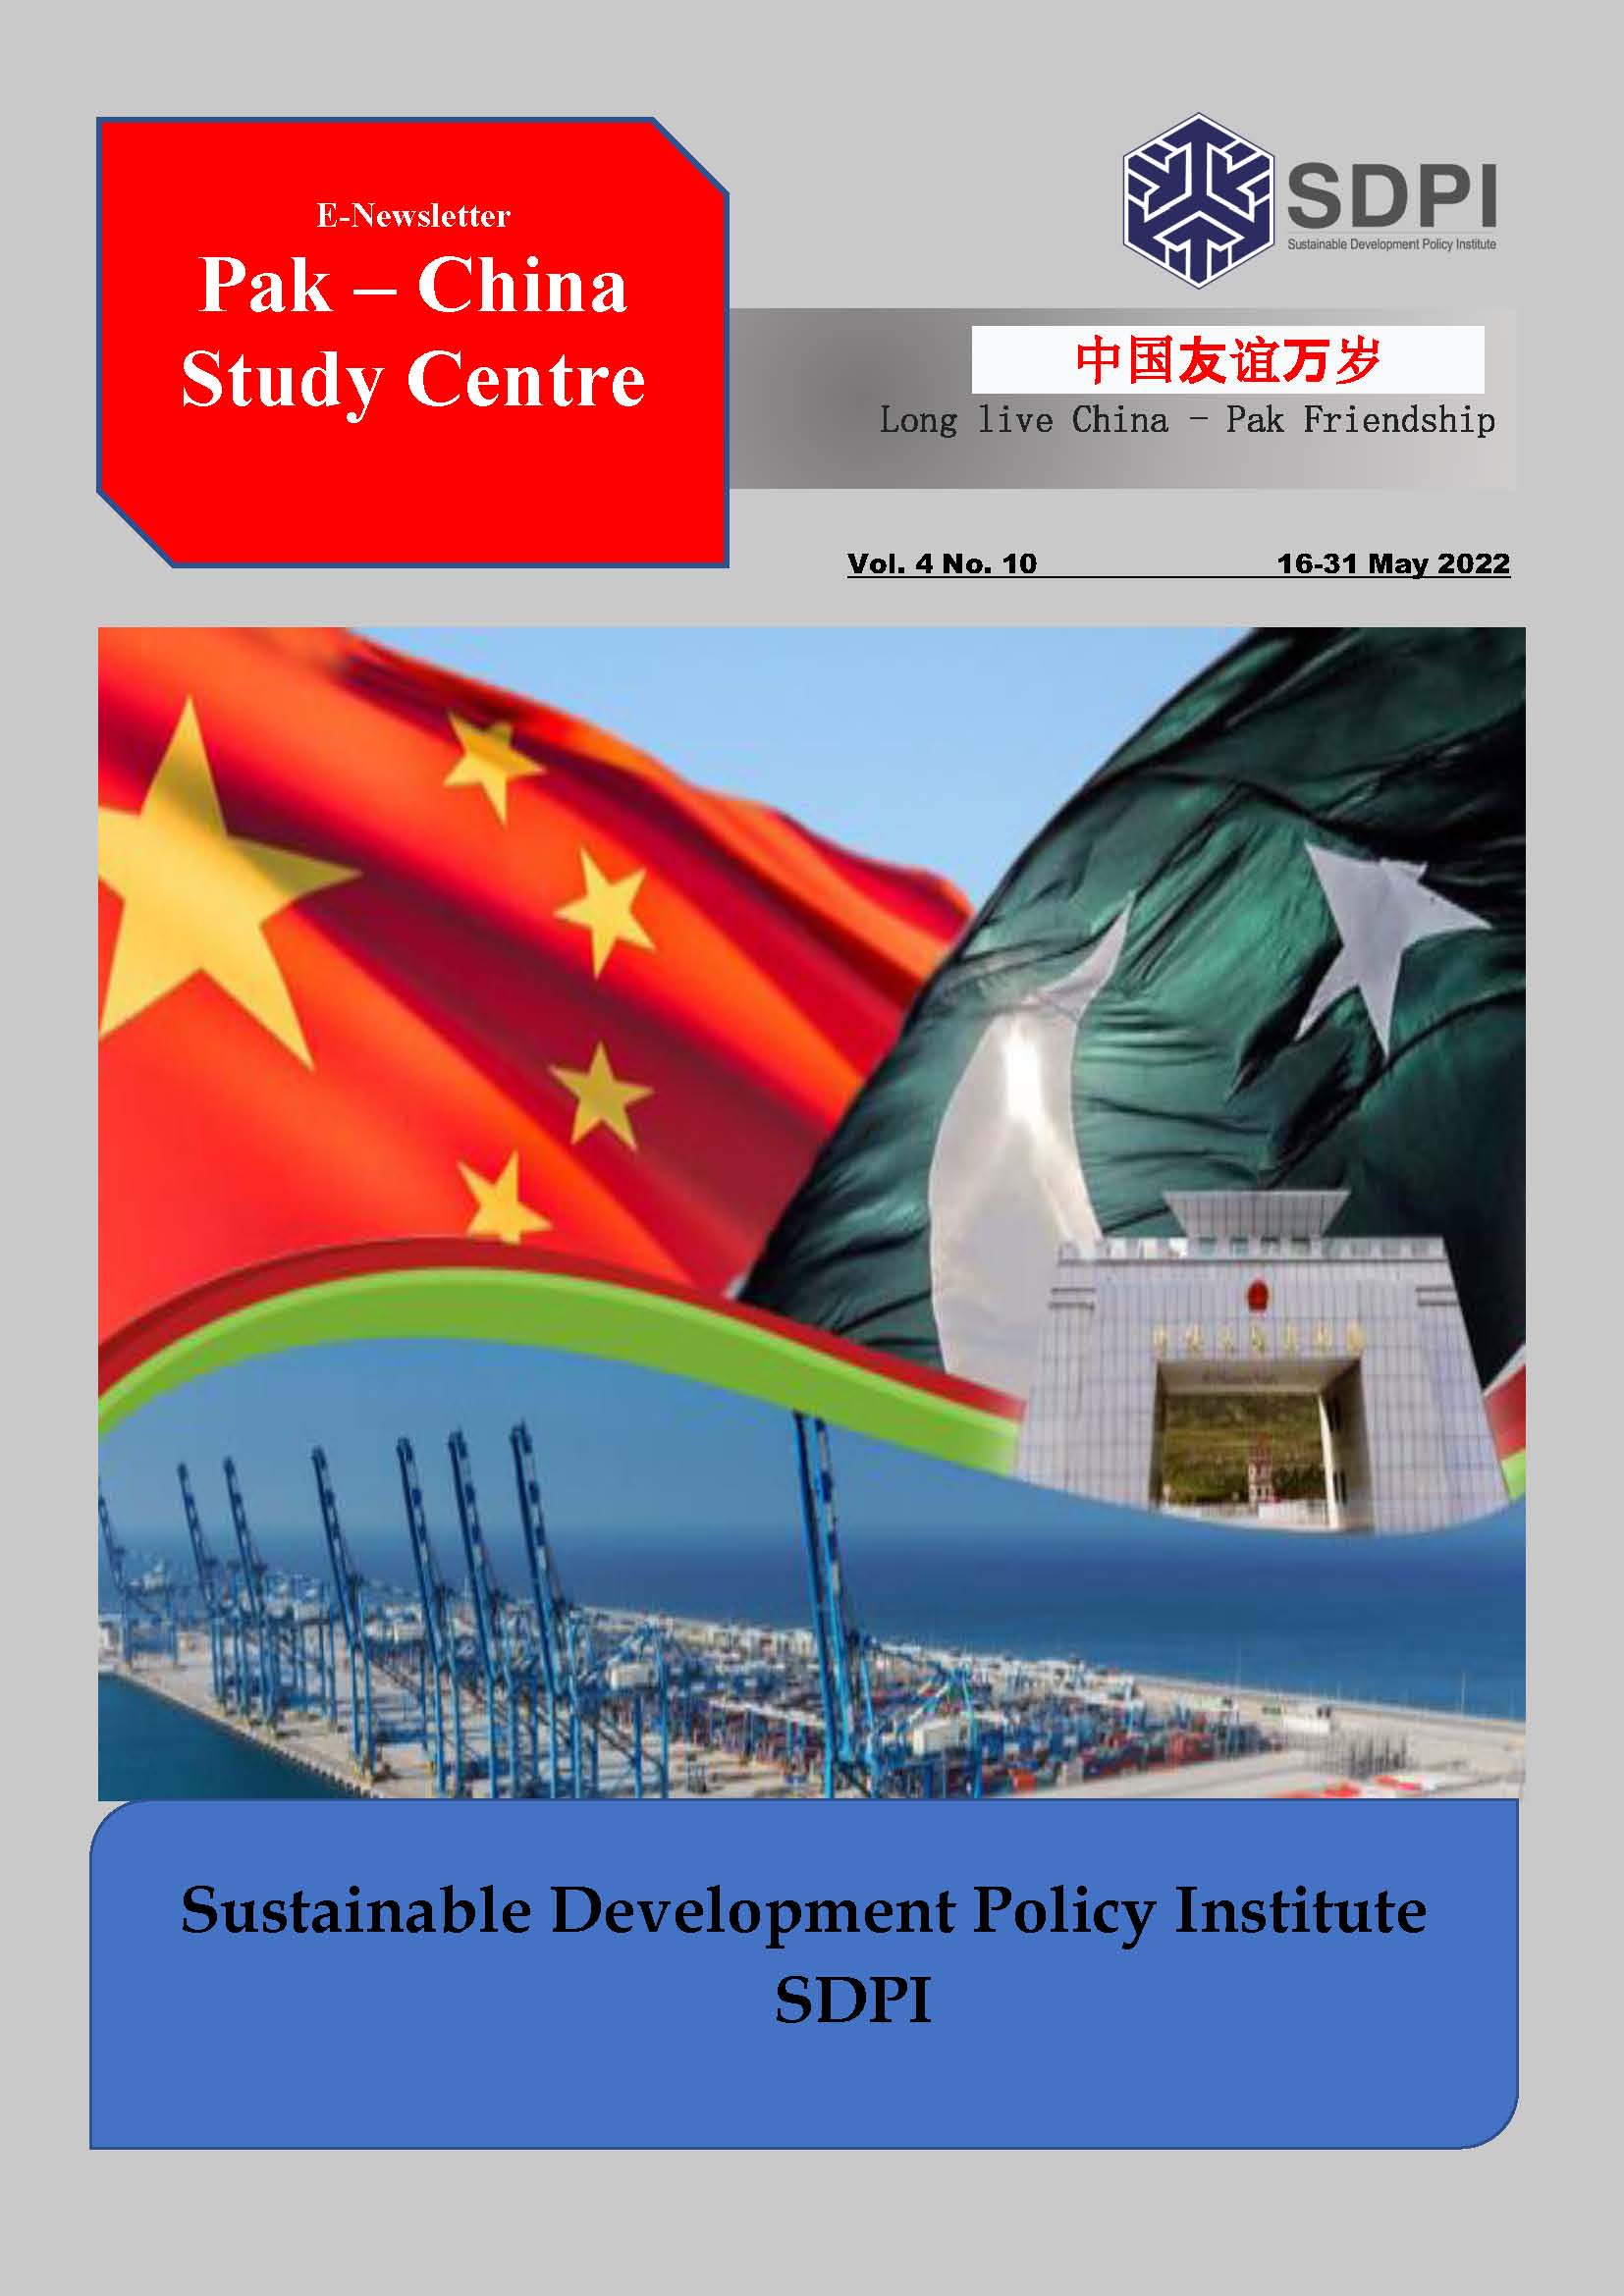 E-Newsletter for China Study Centre Vol. 4, No. 10, Issue 15-31 May 2022